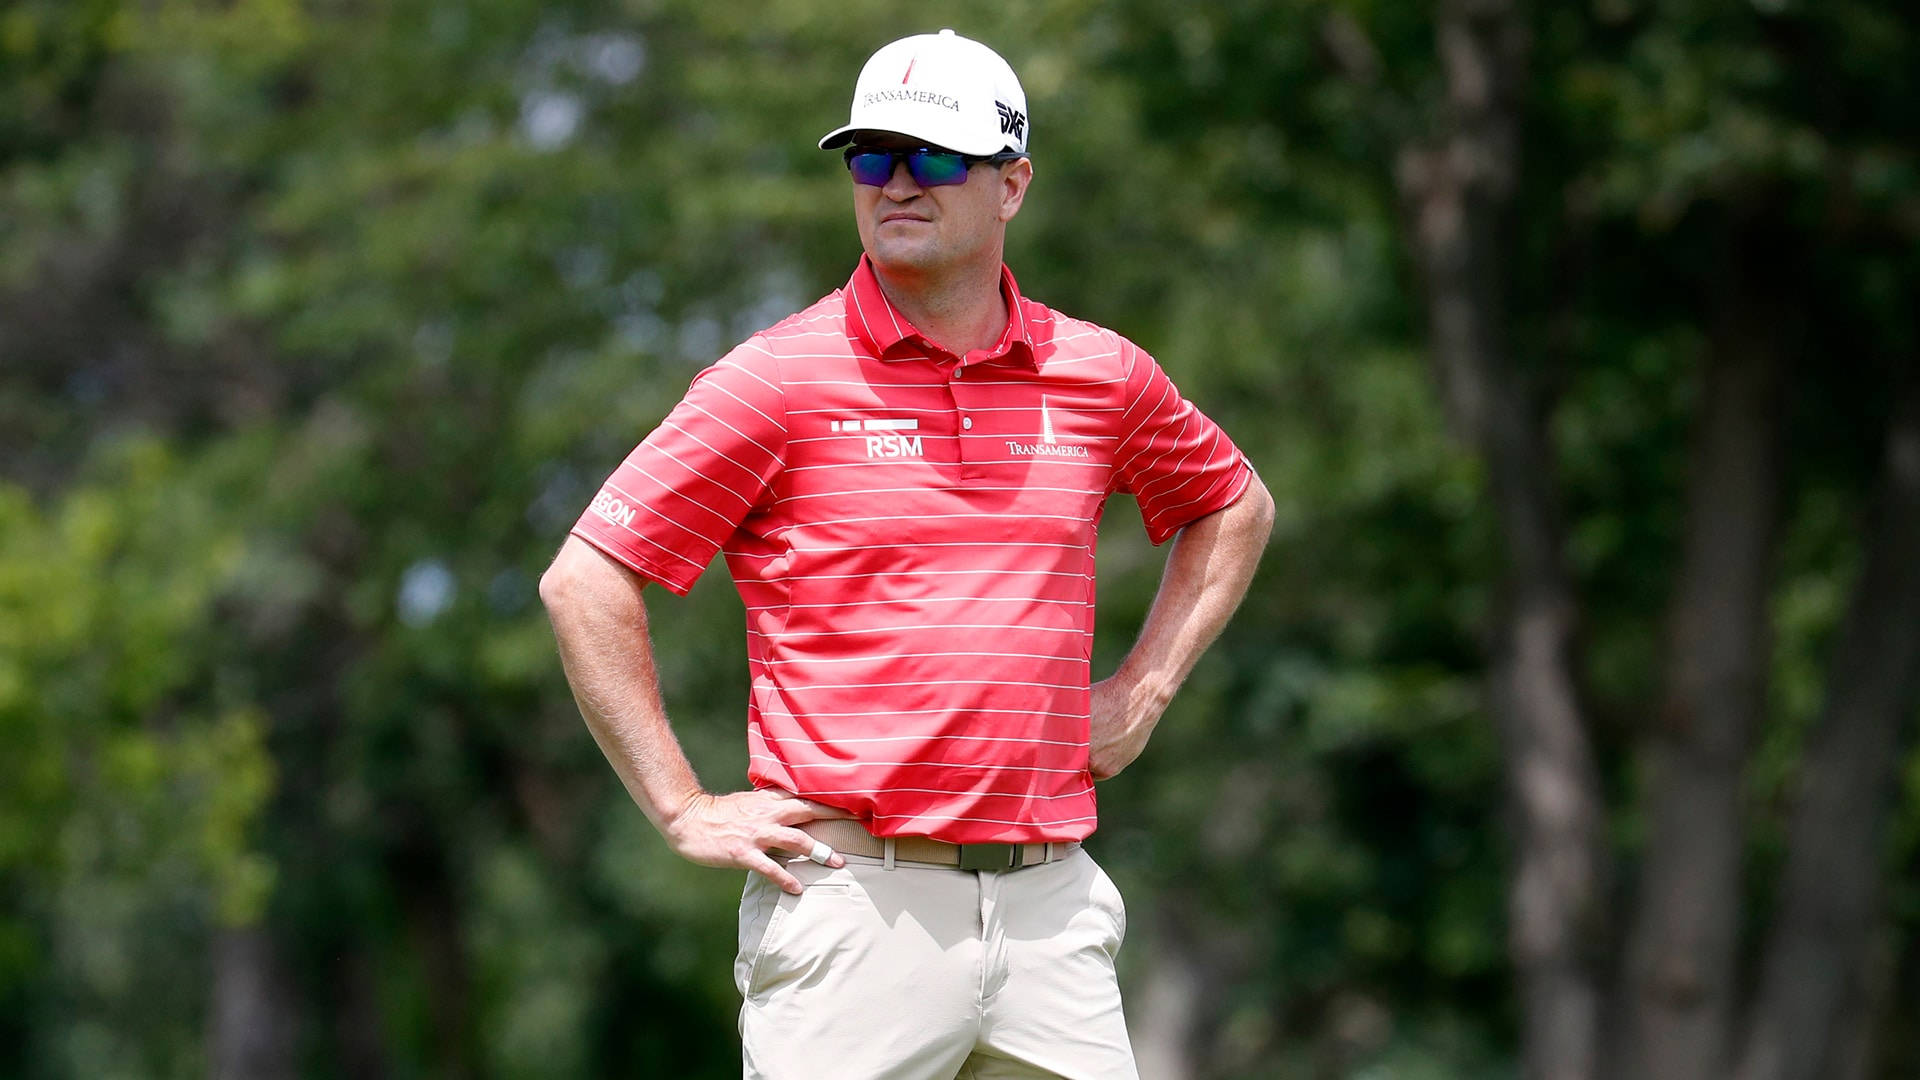 Zachjohnson Röd Skjorta (this Could Potentially Be A Phrase To Describe A Wallpaper Featuring Zach Johnson Wearing A Red Shirt) Wallpaper